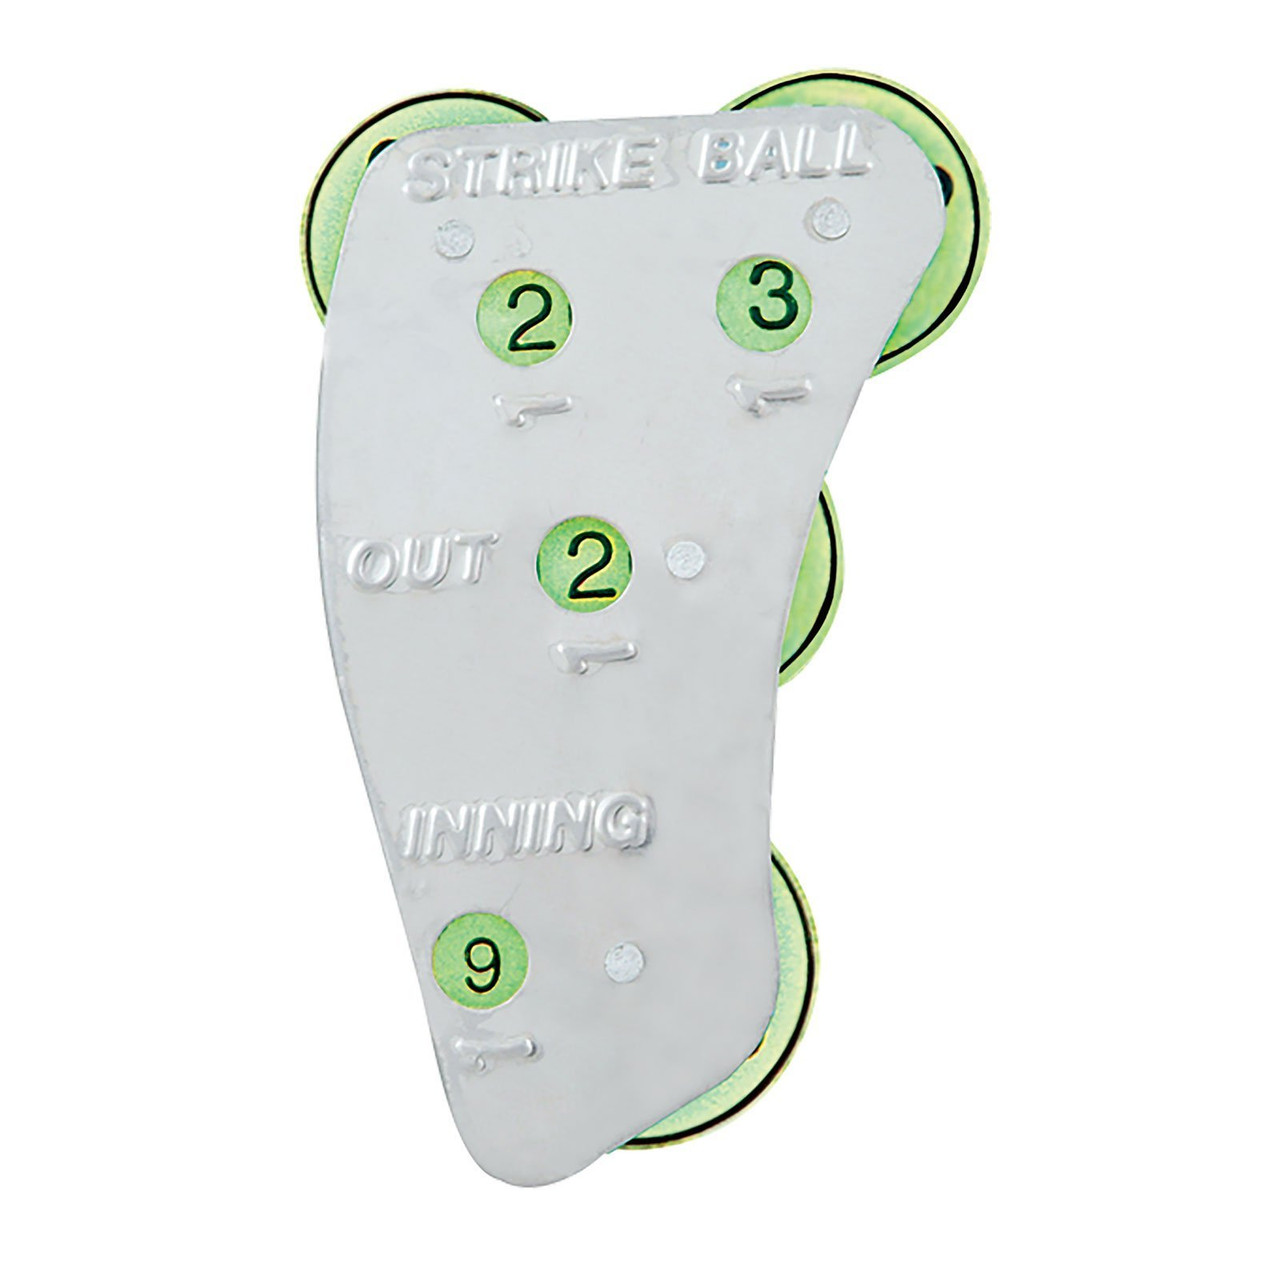 Champion Sports 4-Wheel CALL ORDER Umpire Indicator Out Inning Ball Strike 